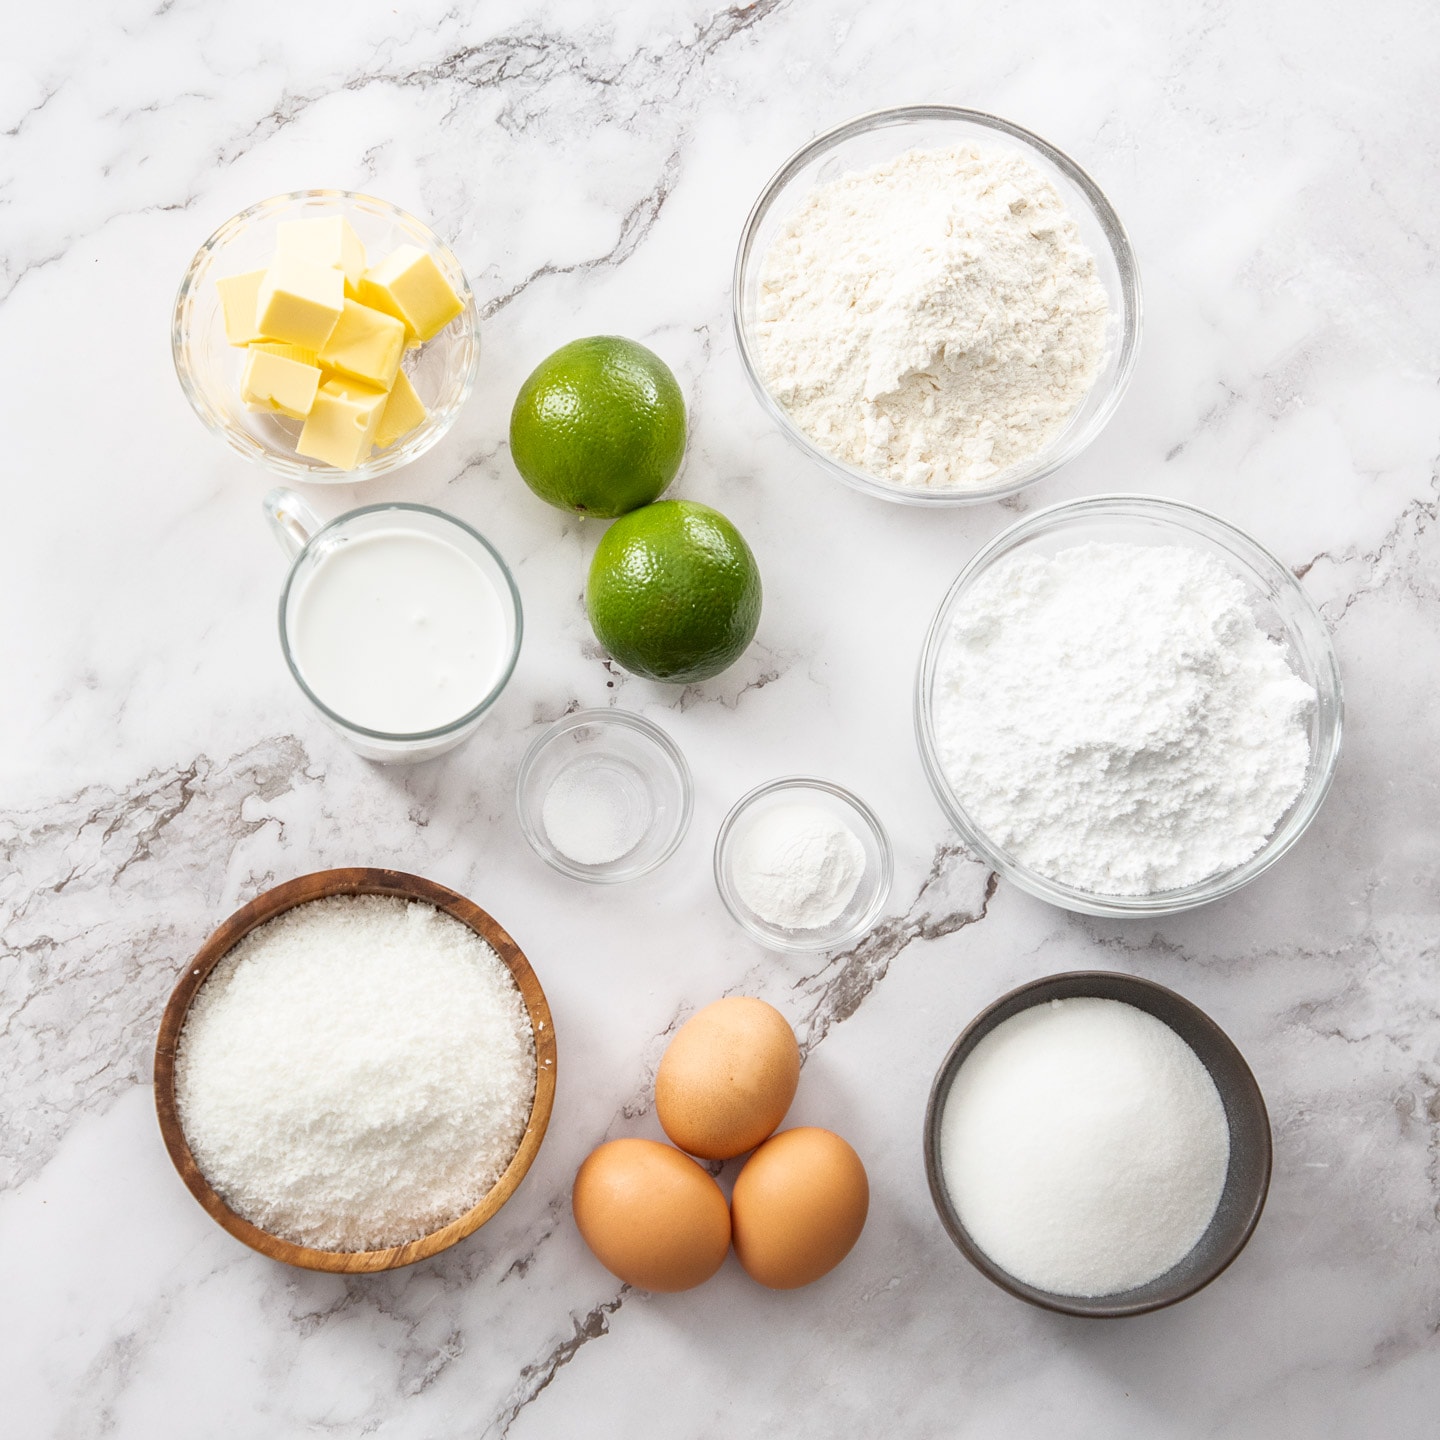 Ingredients for lime and coconut cake on a marble surface.